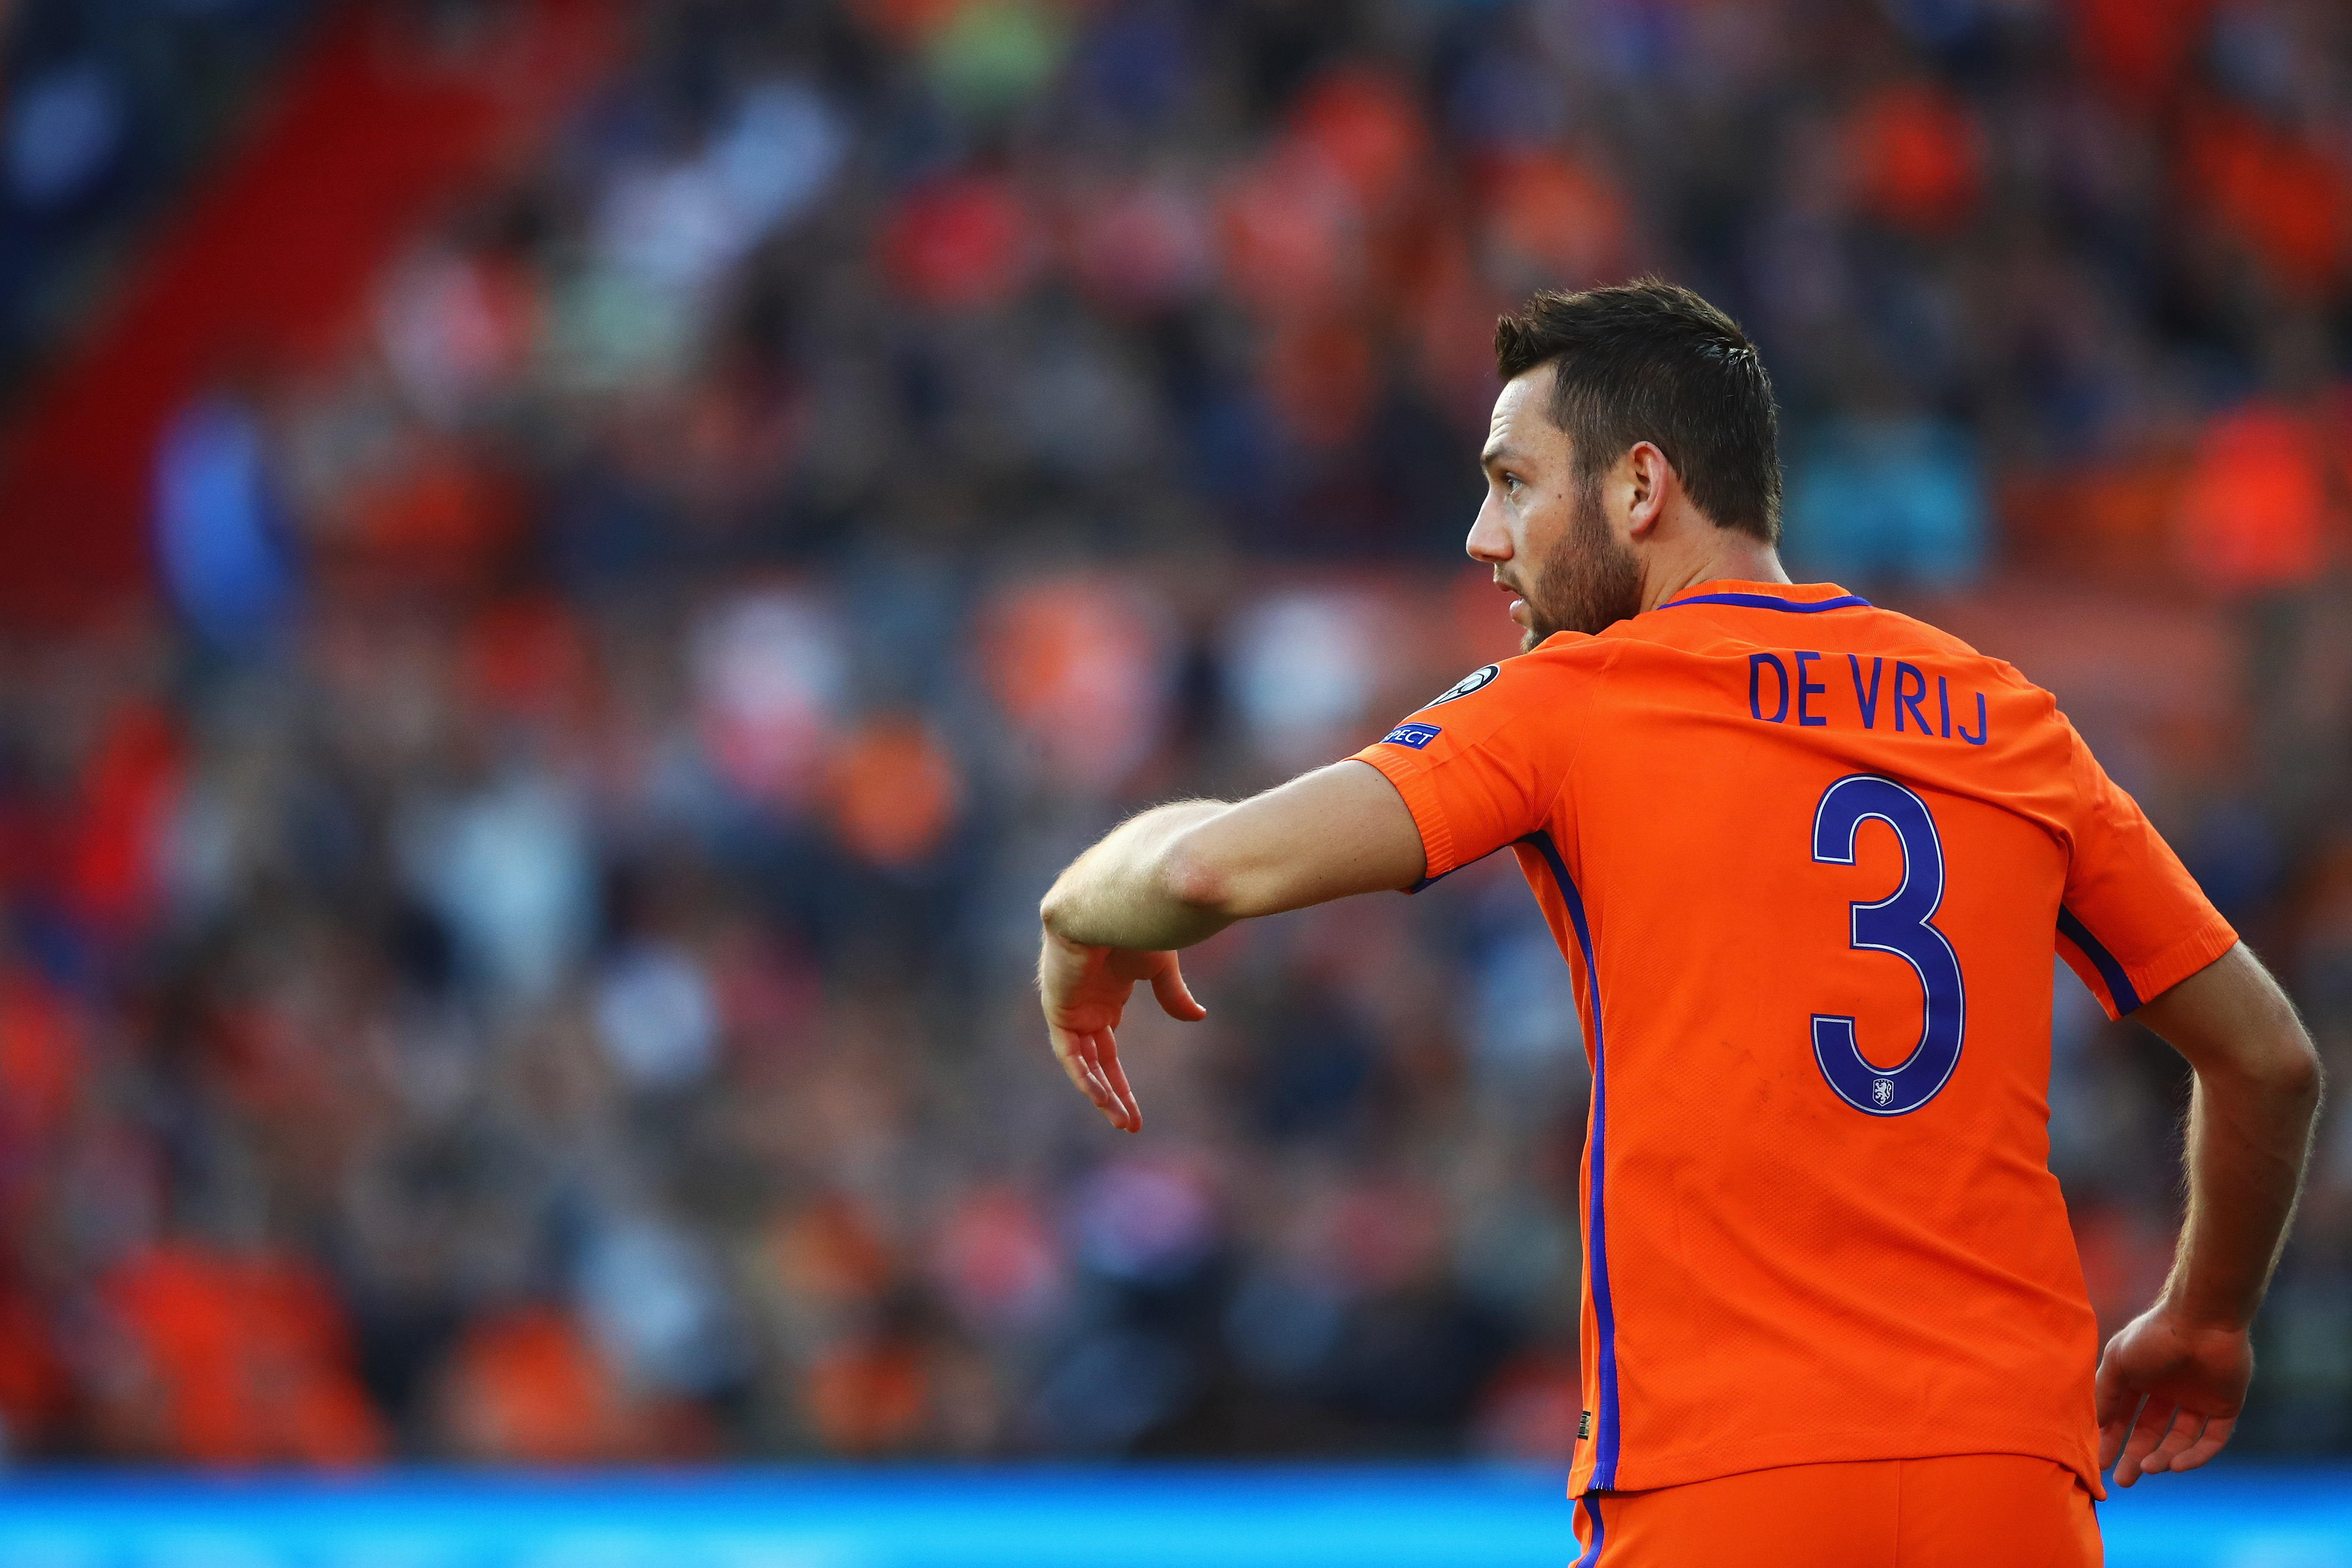 Stefan de Vrij will be unavailable for Netherlands against Italy due to injury. (Photo by Dean Mouhtaropoulos/Getty Images)